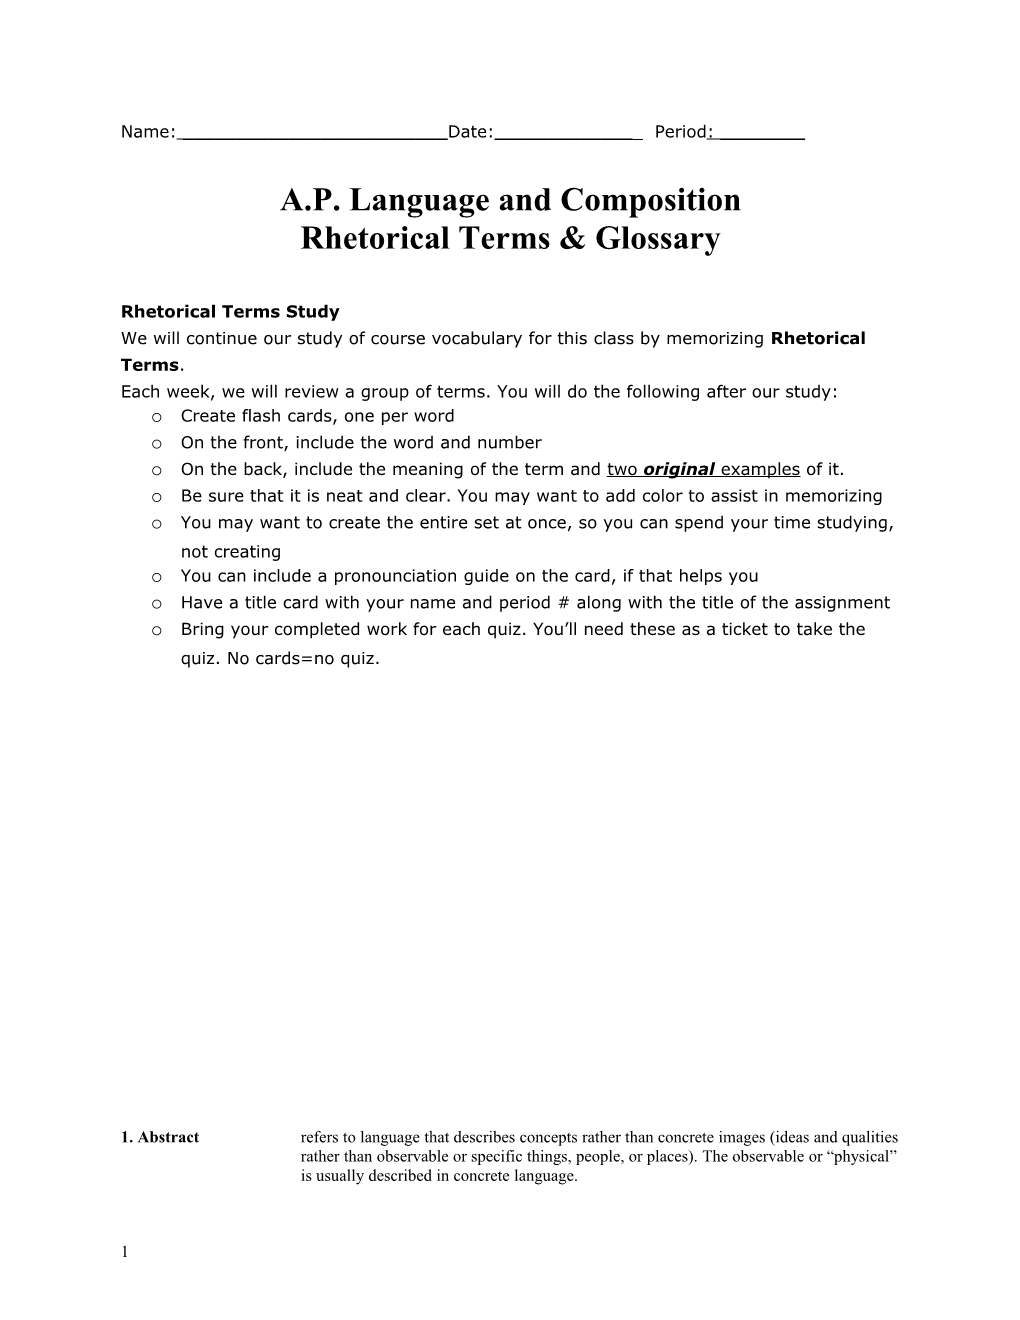 A.P. Language and Composition